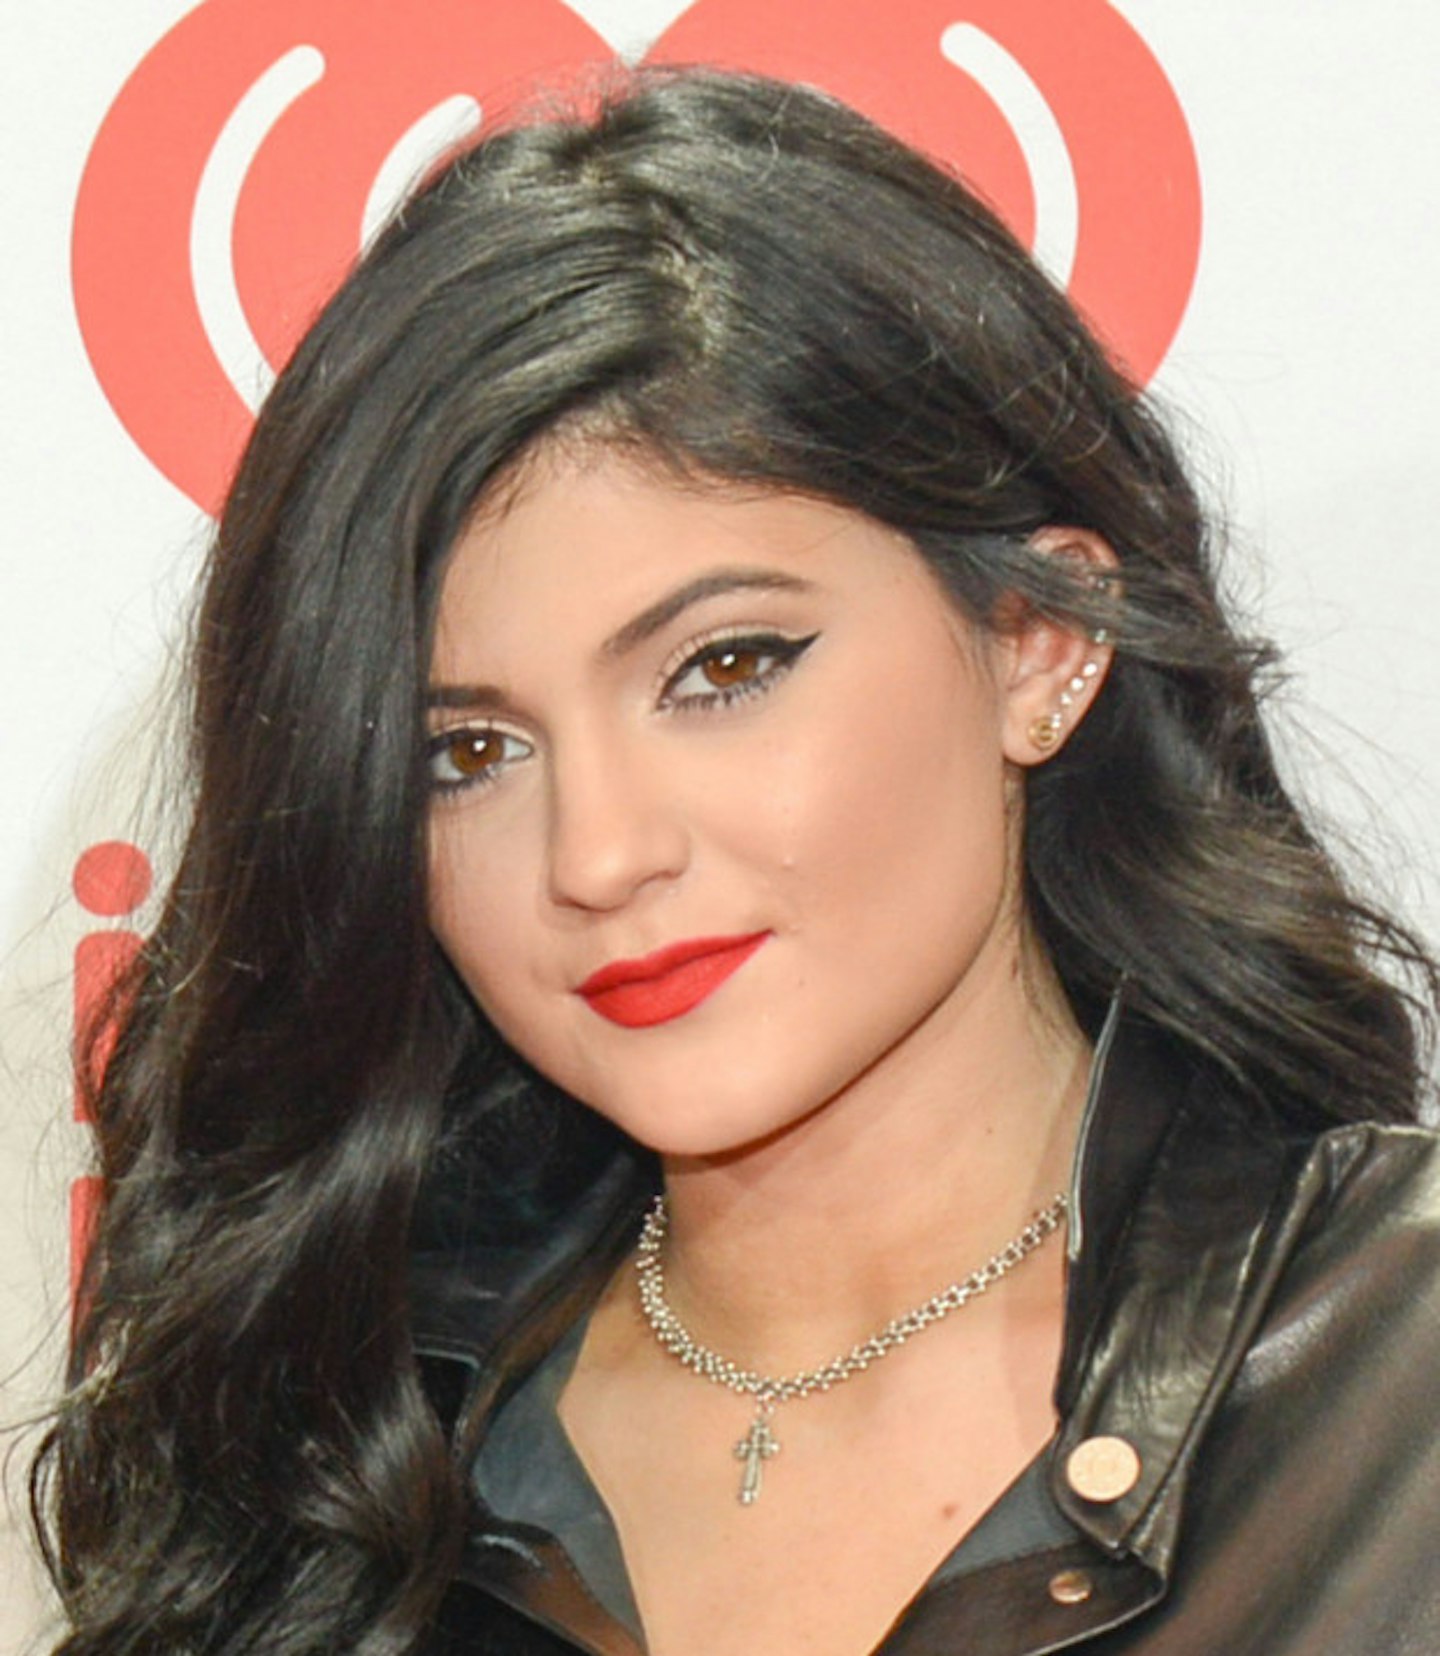 Red lipstick is a signature of Kylie's, but this one was taken a couple of years ago. What do you think, do her lips look less full back then?